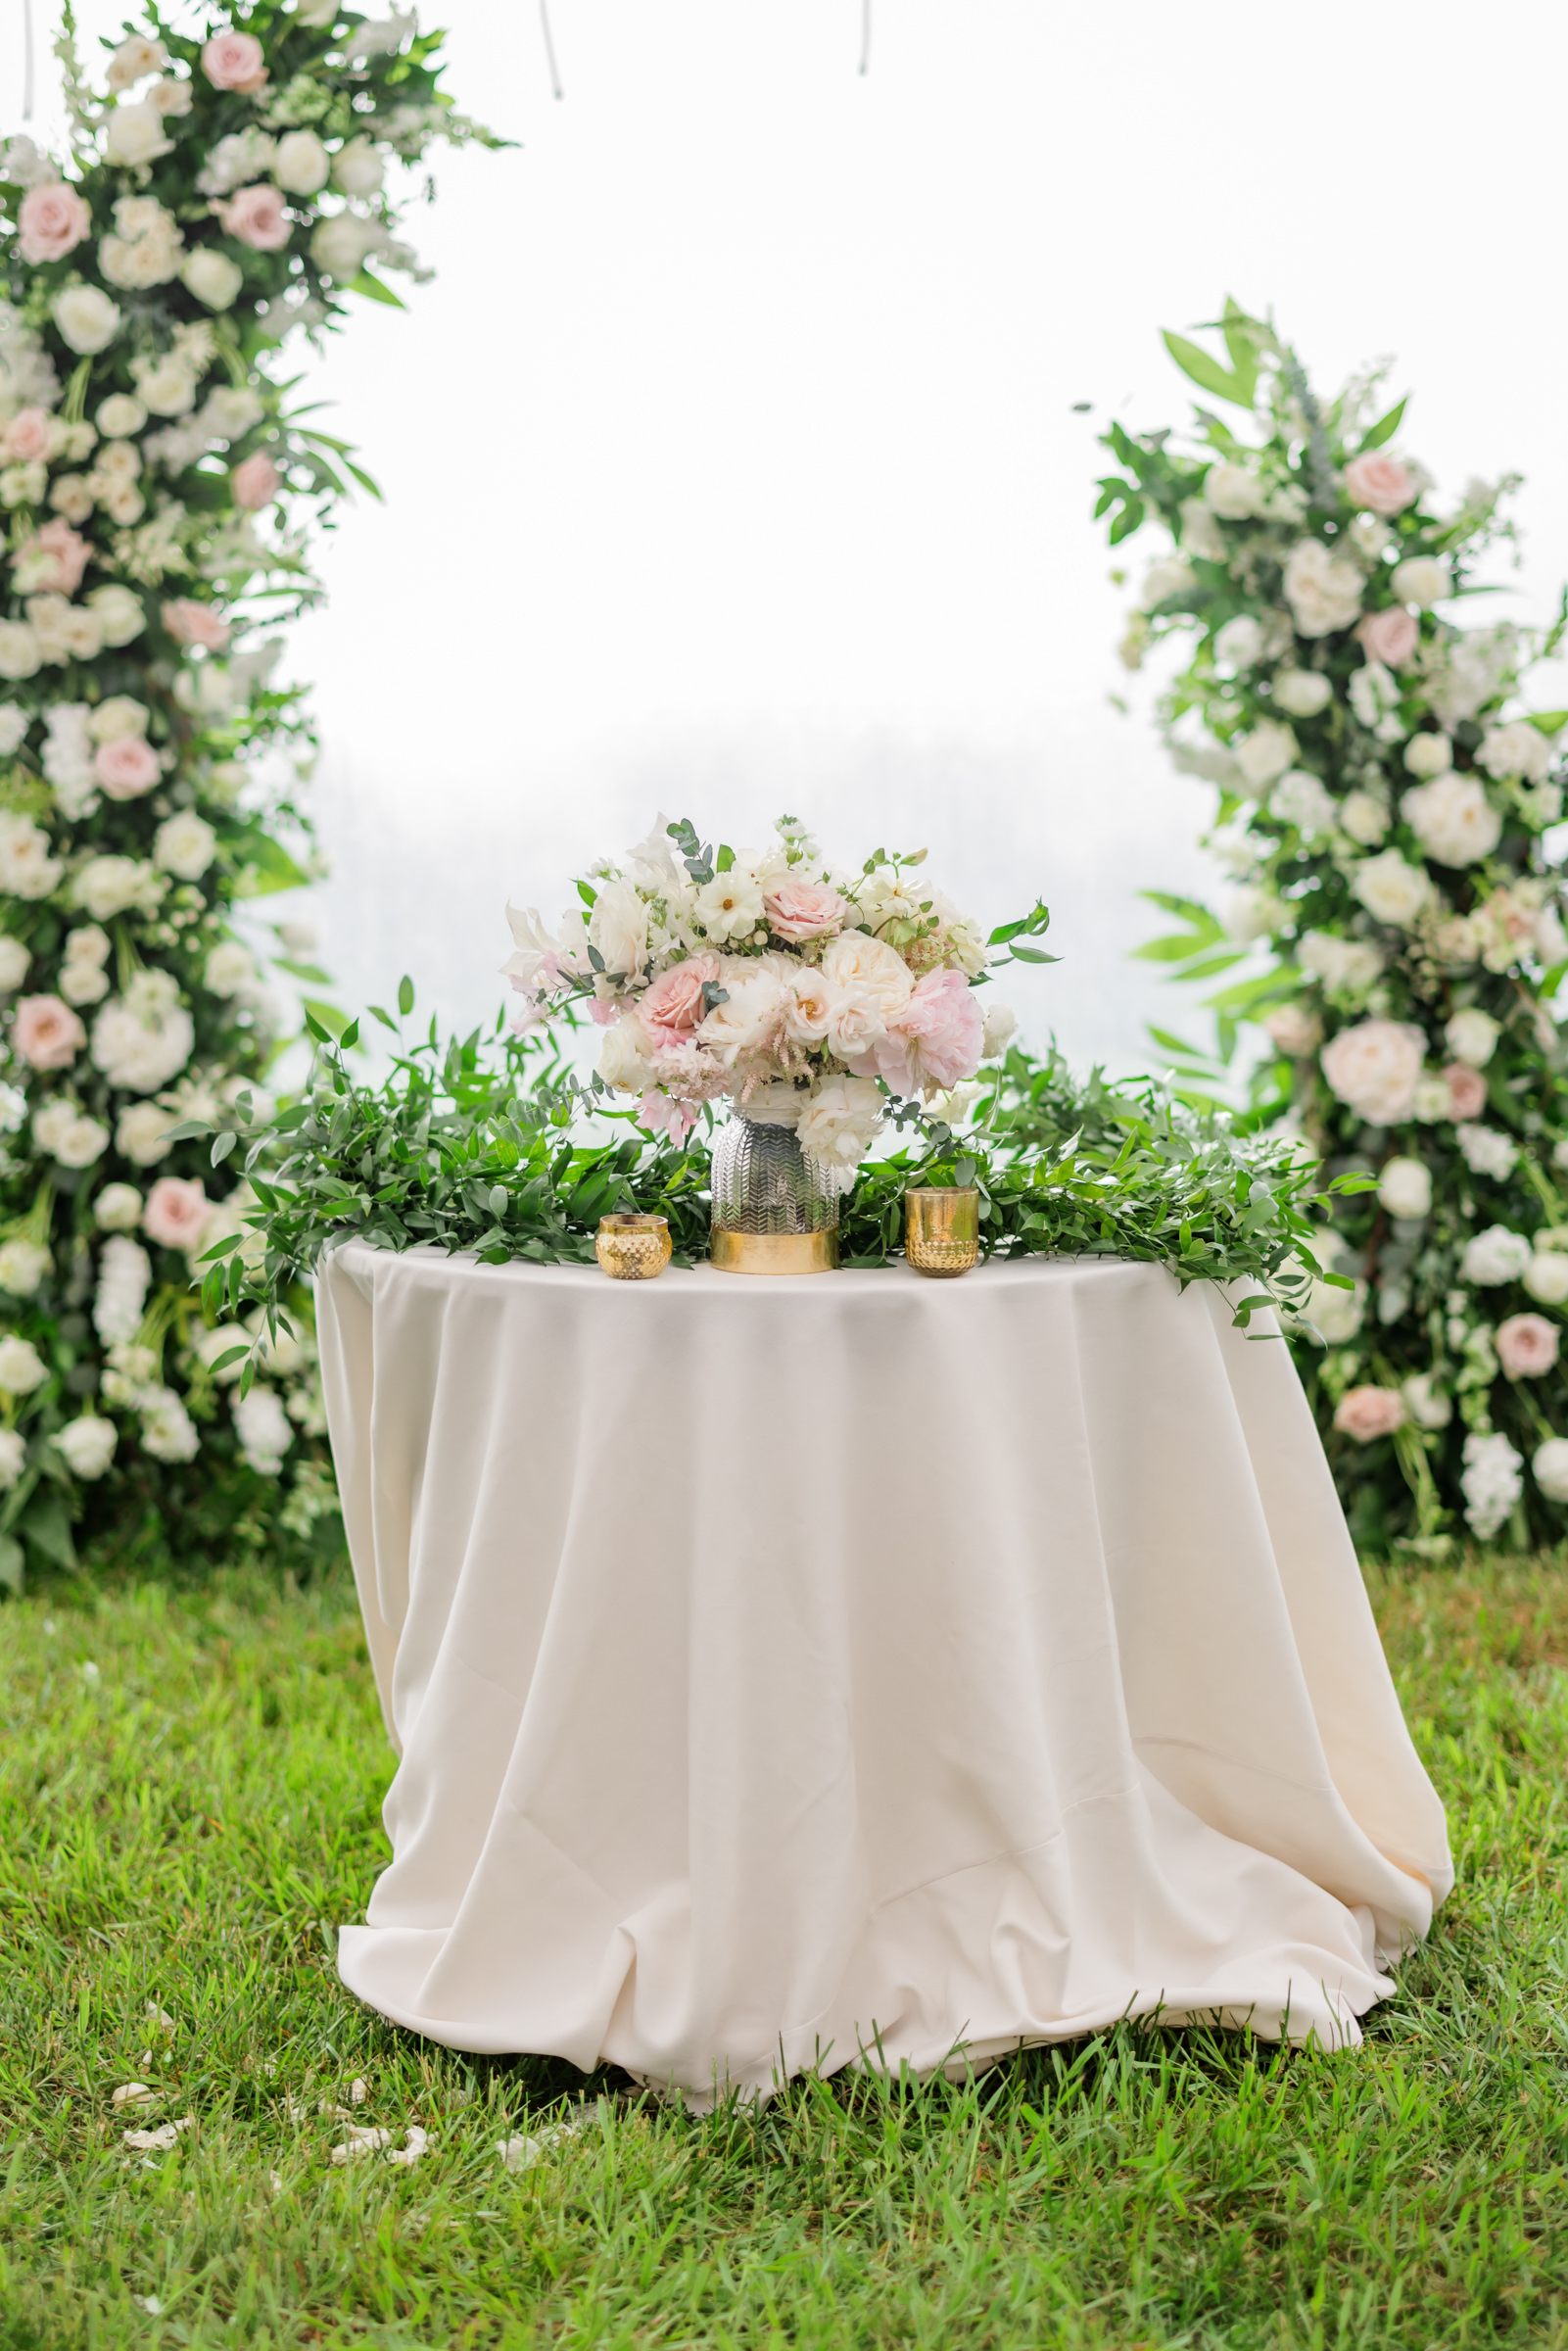 pink table cloth with greenery and flowers on top